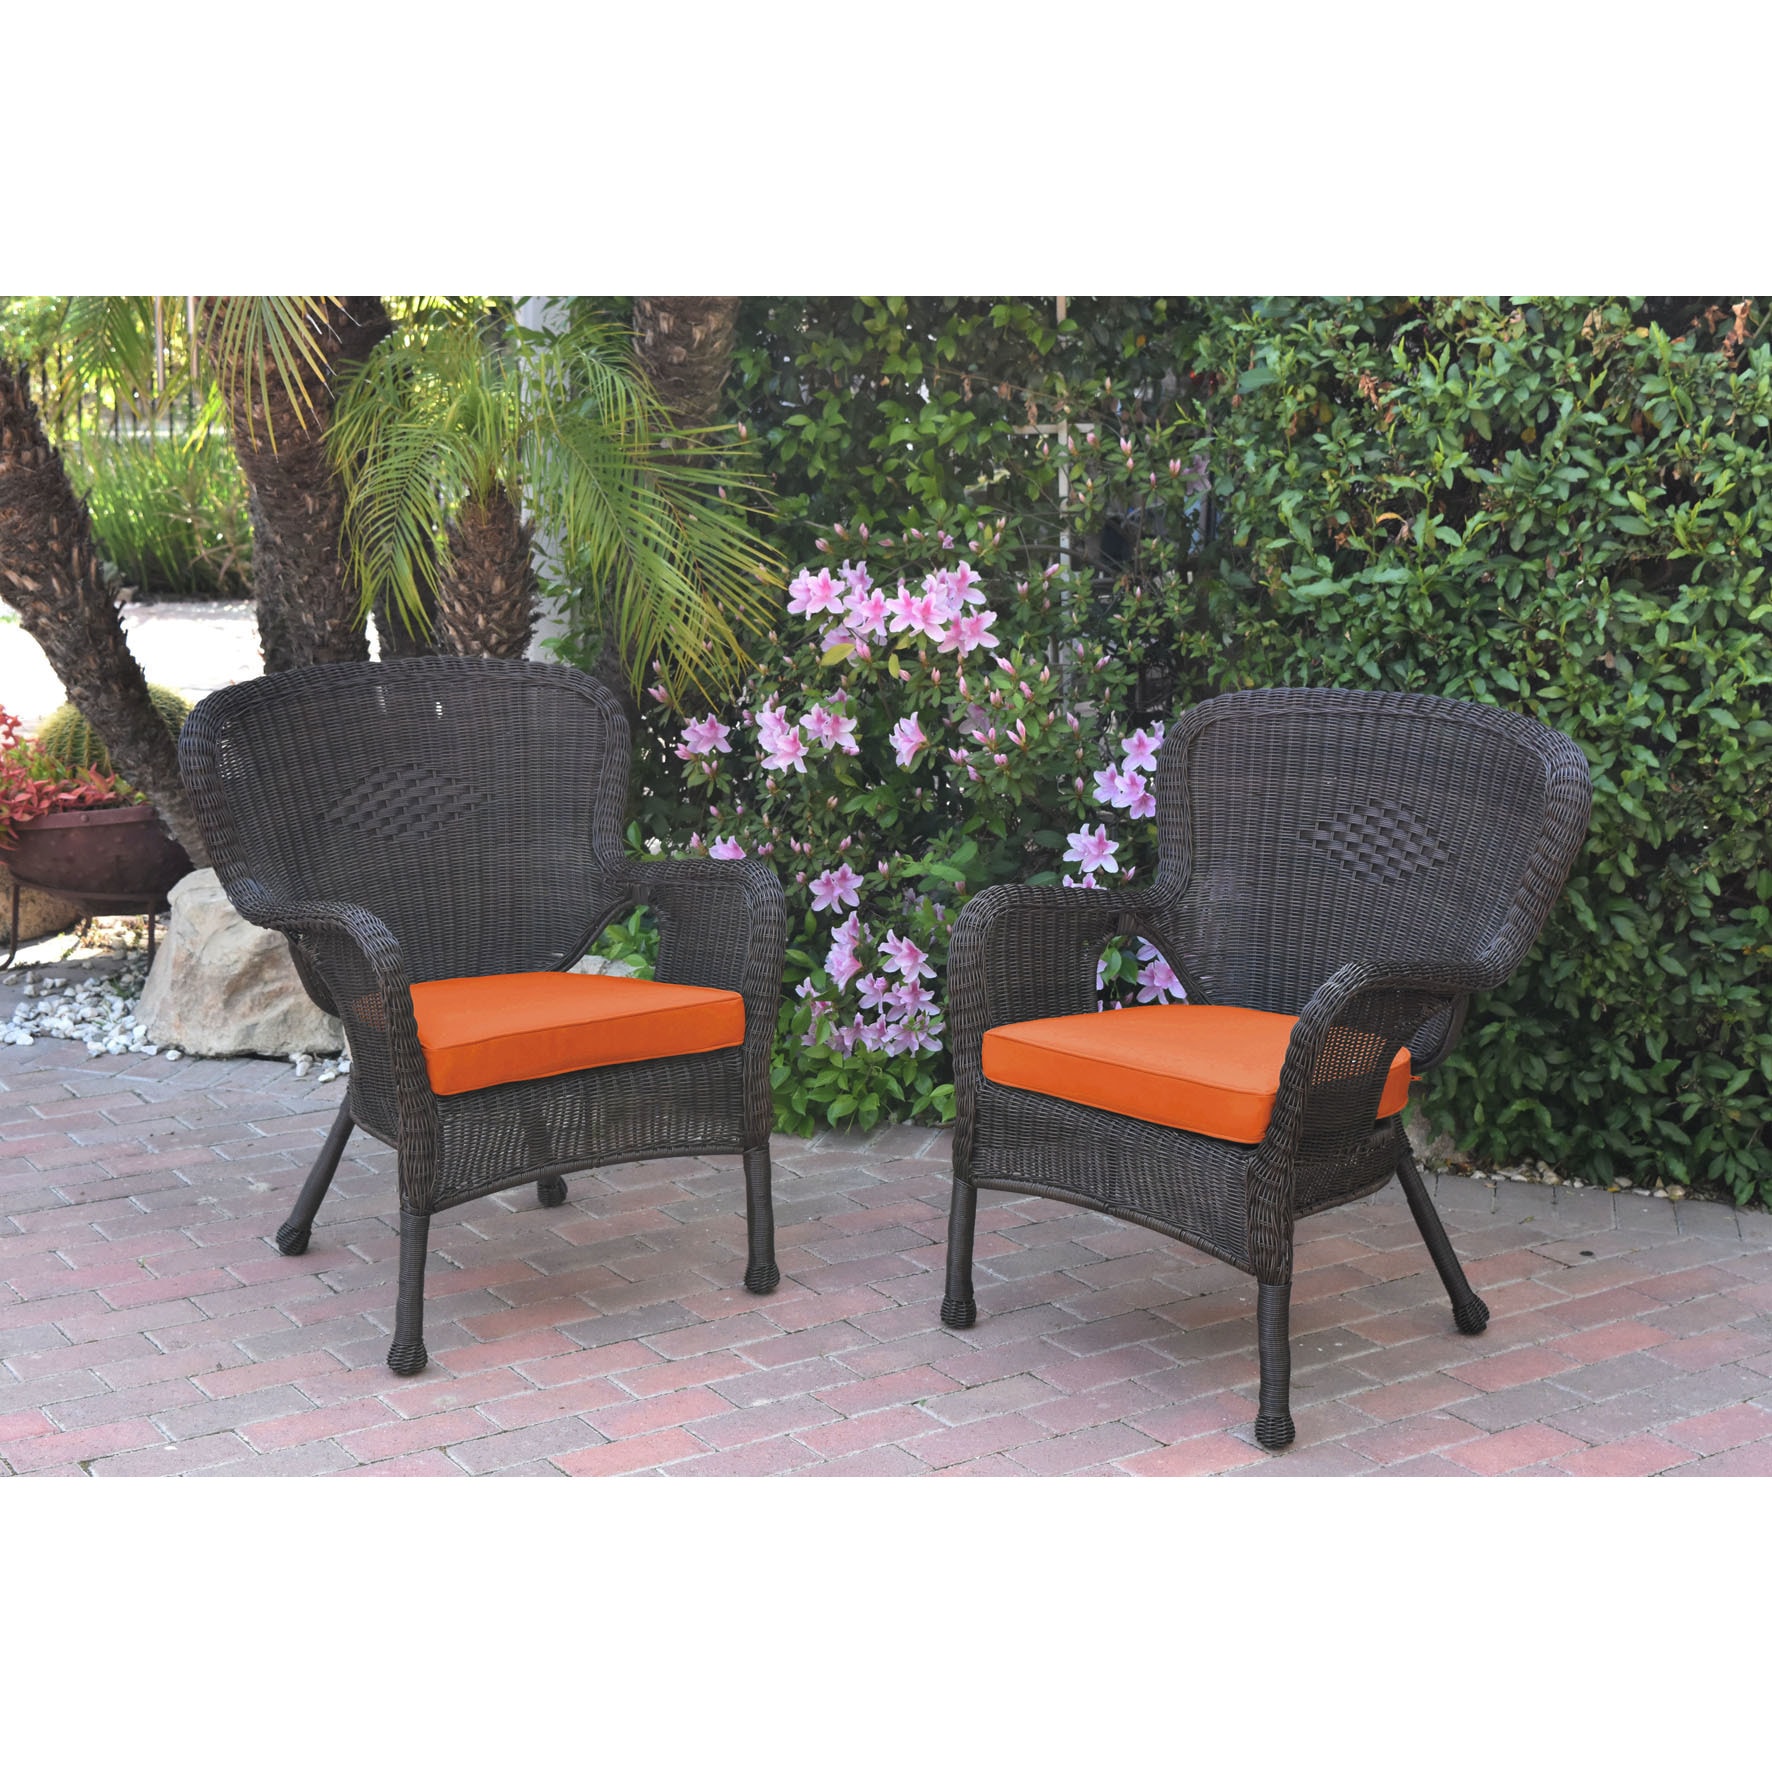 Jeco Windsor Espresso Resin Wicker Chairs With Cushions (set Of 2)